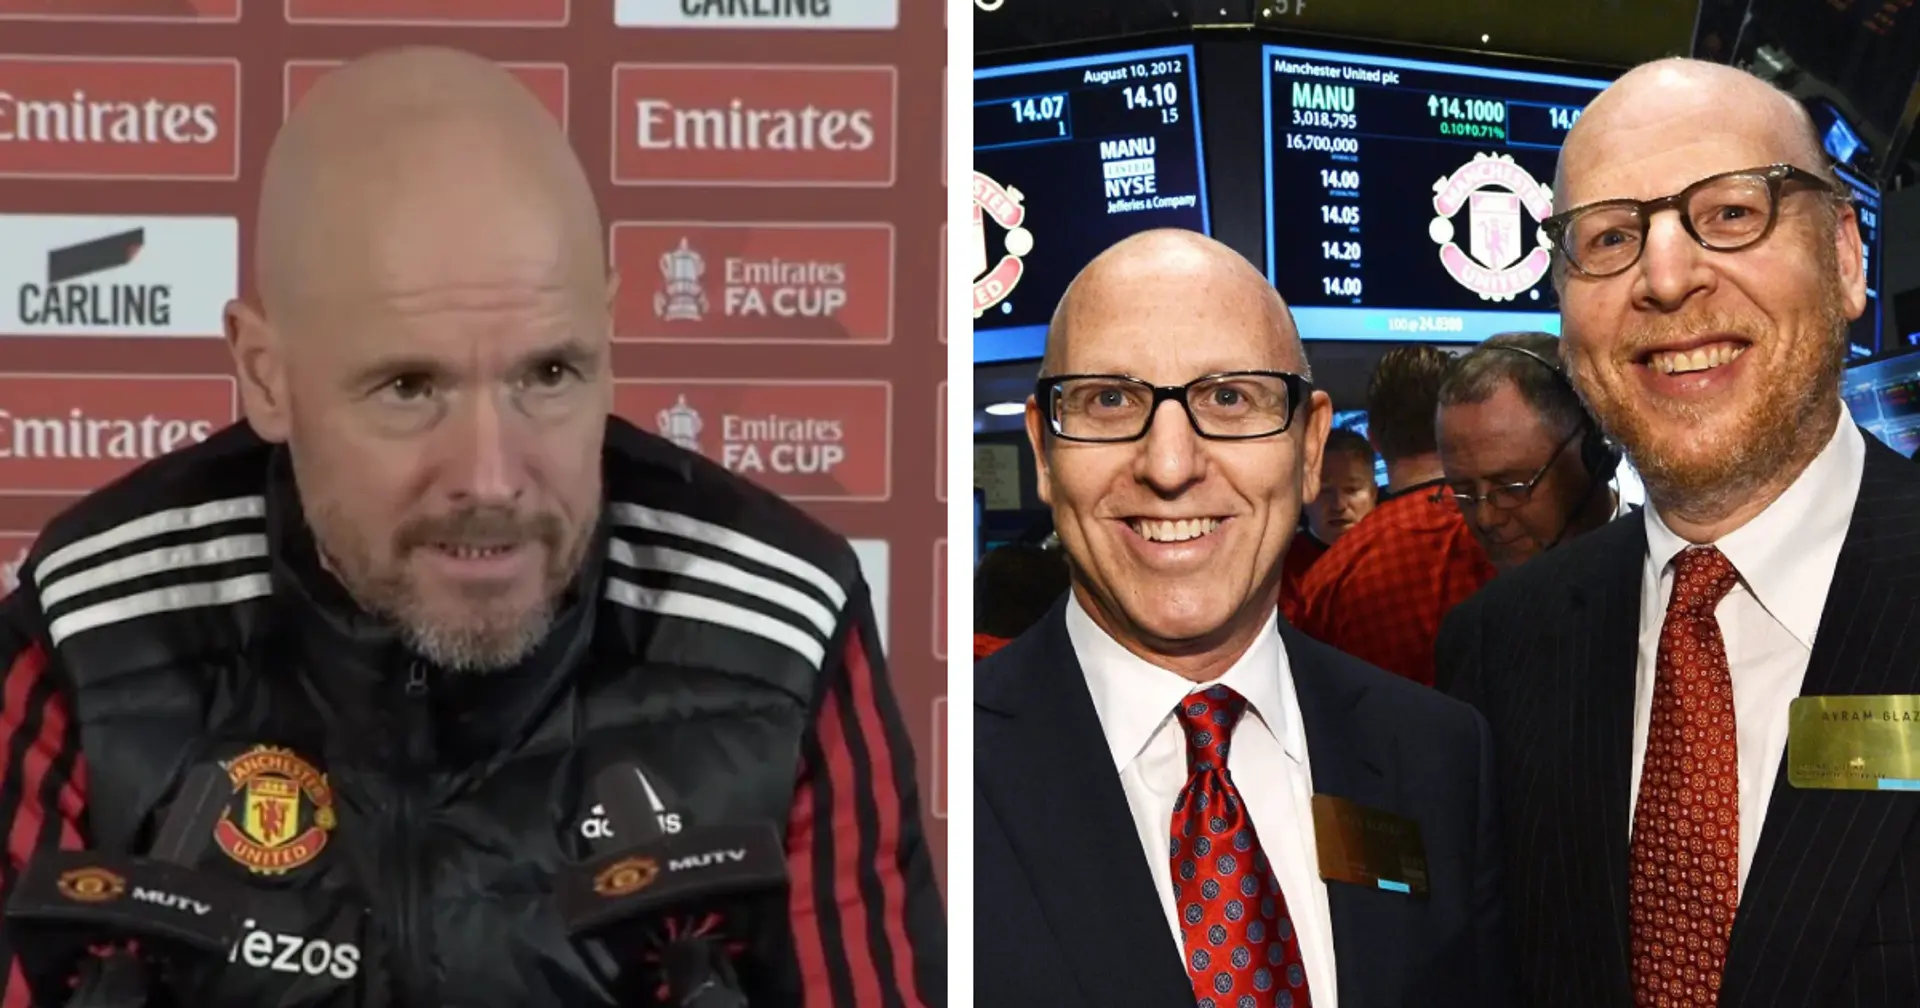 Ten Hag preparing list of 'sellable' Man United players to fund summer transfers